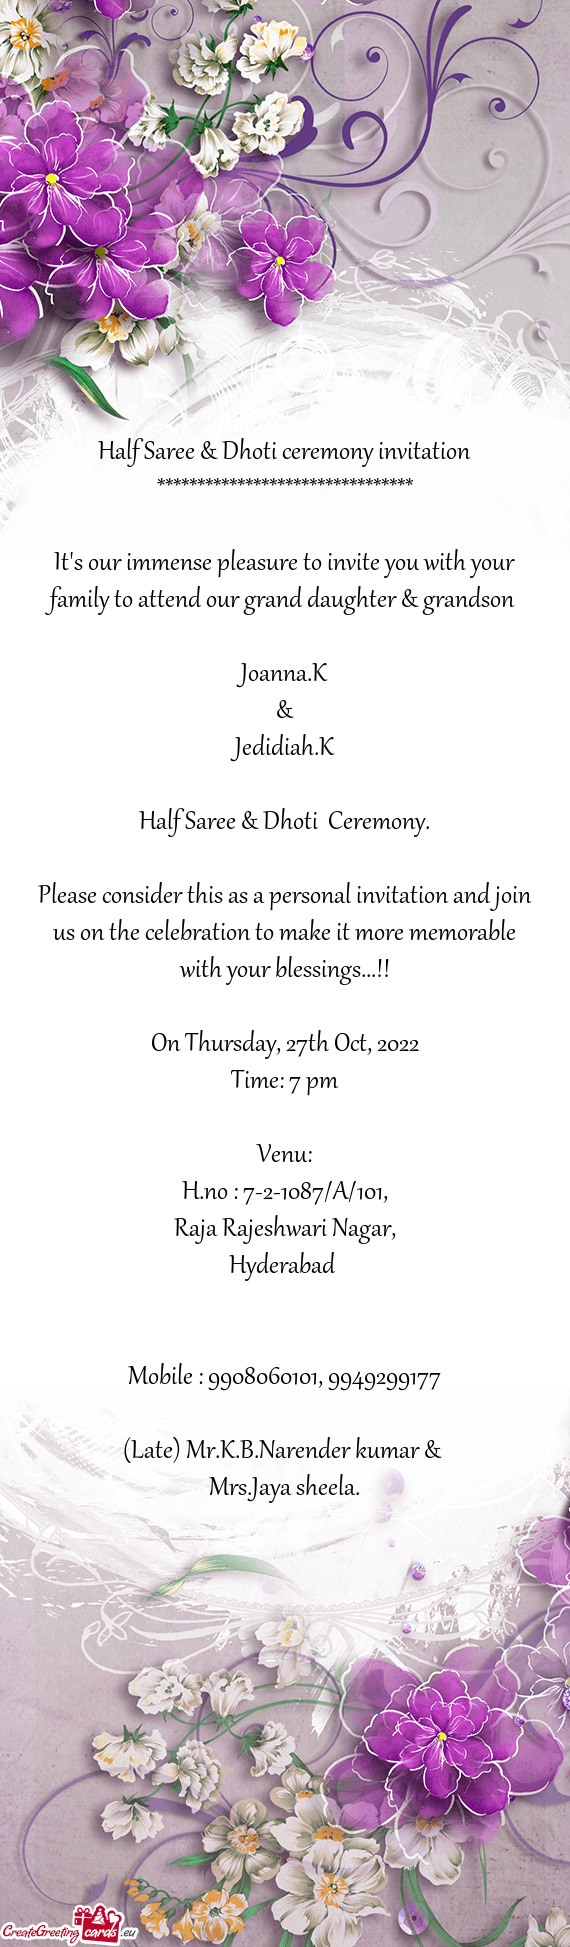 It's our immense pleasure to invite you with your family to attend our grand daughter & grandson